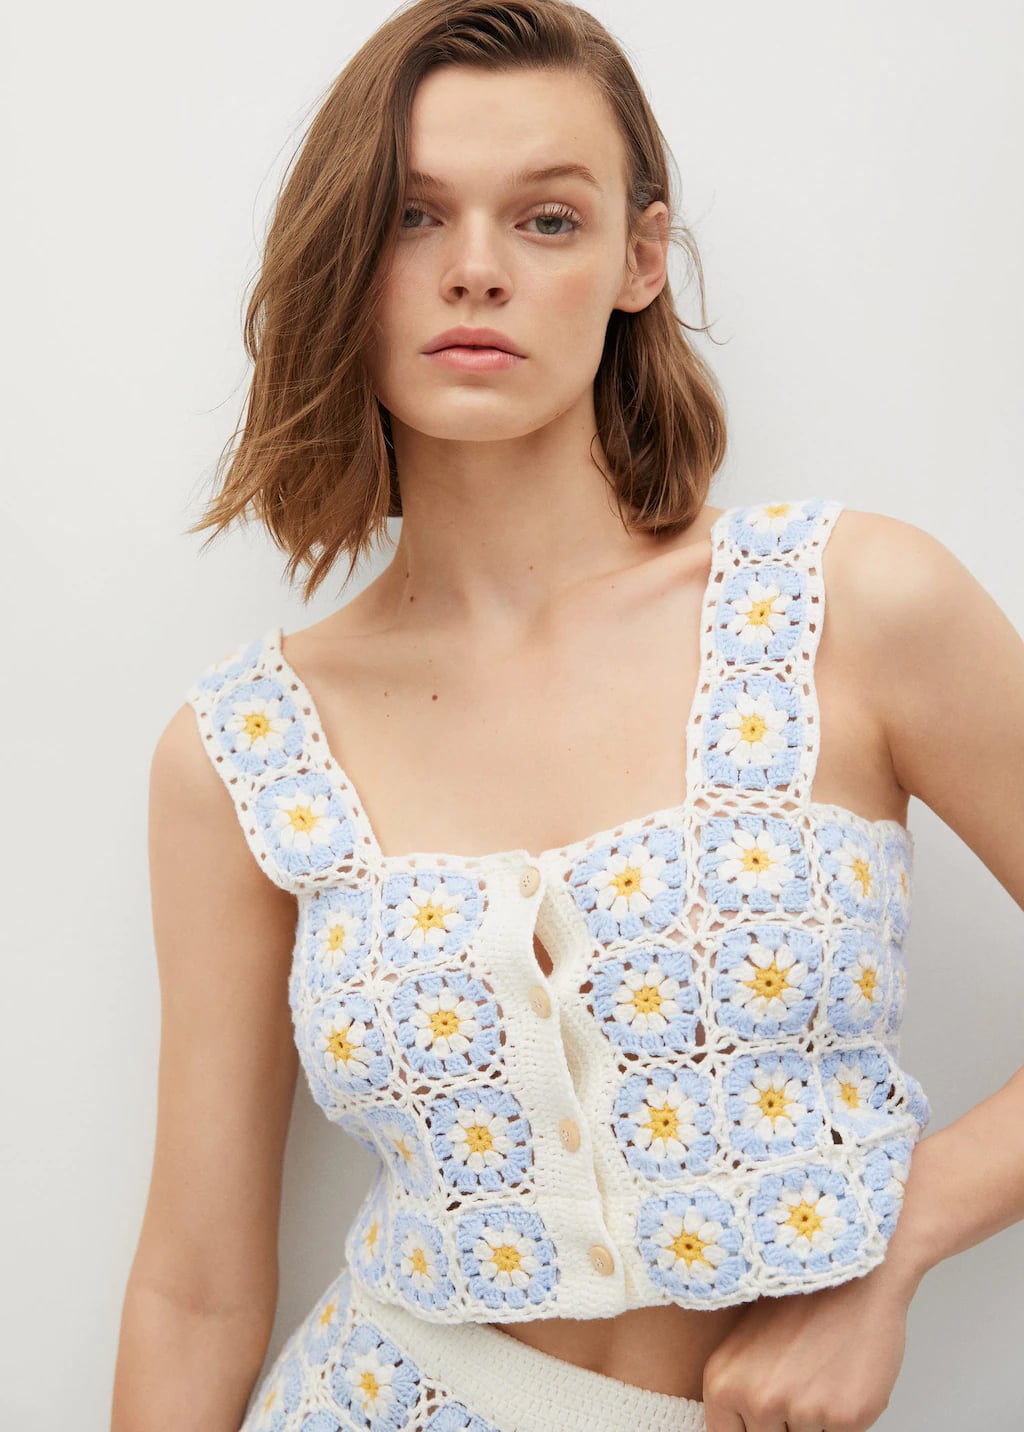 For a Cute Print: Handmade Daisy Crochet Top, Get Ready to Serve Looks  This Fall With These Exciting Tips on Colourful Layering